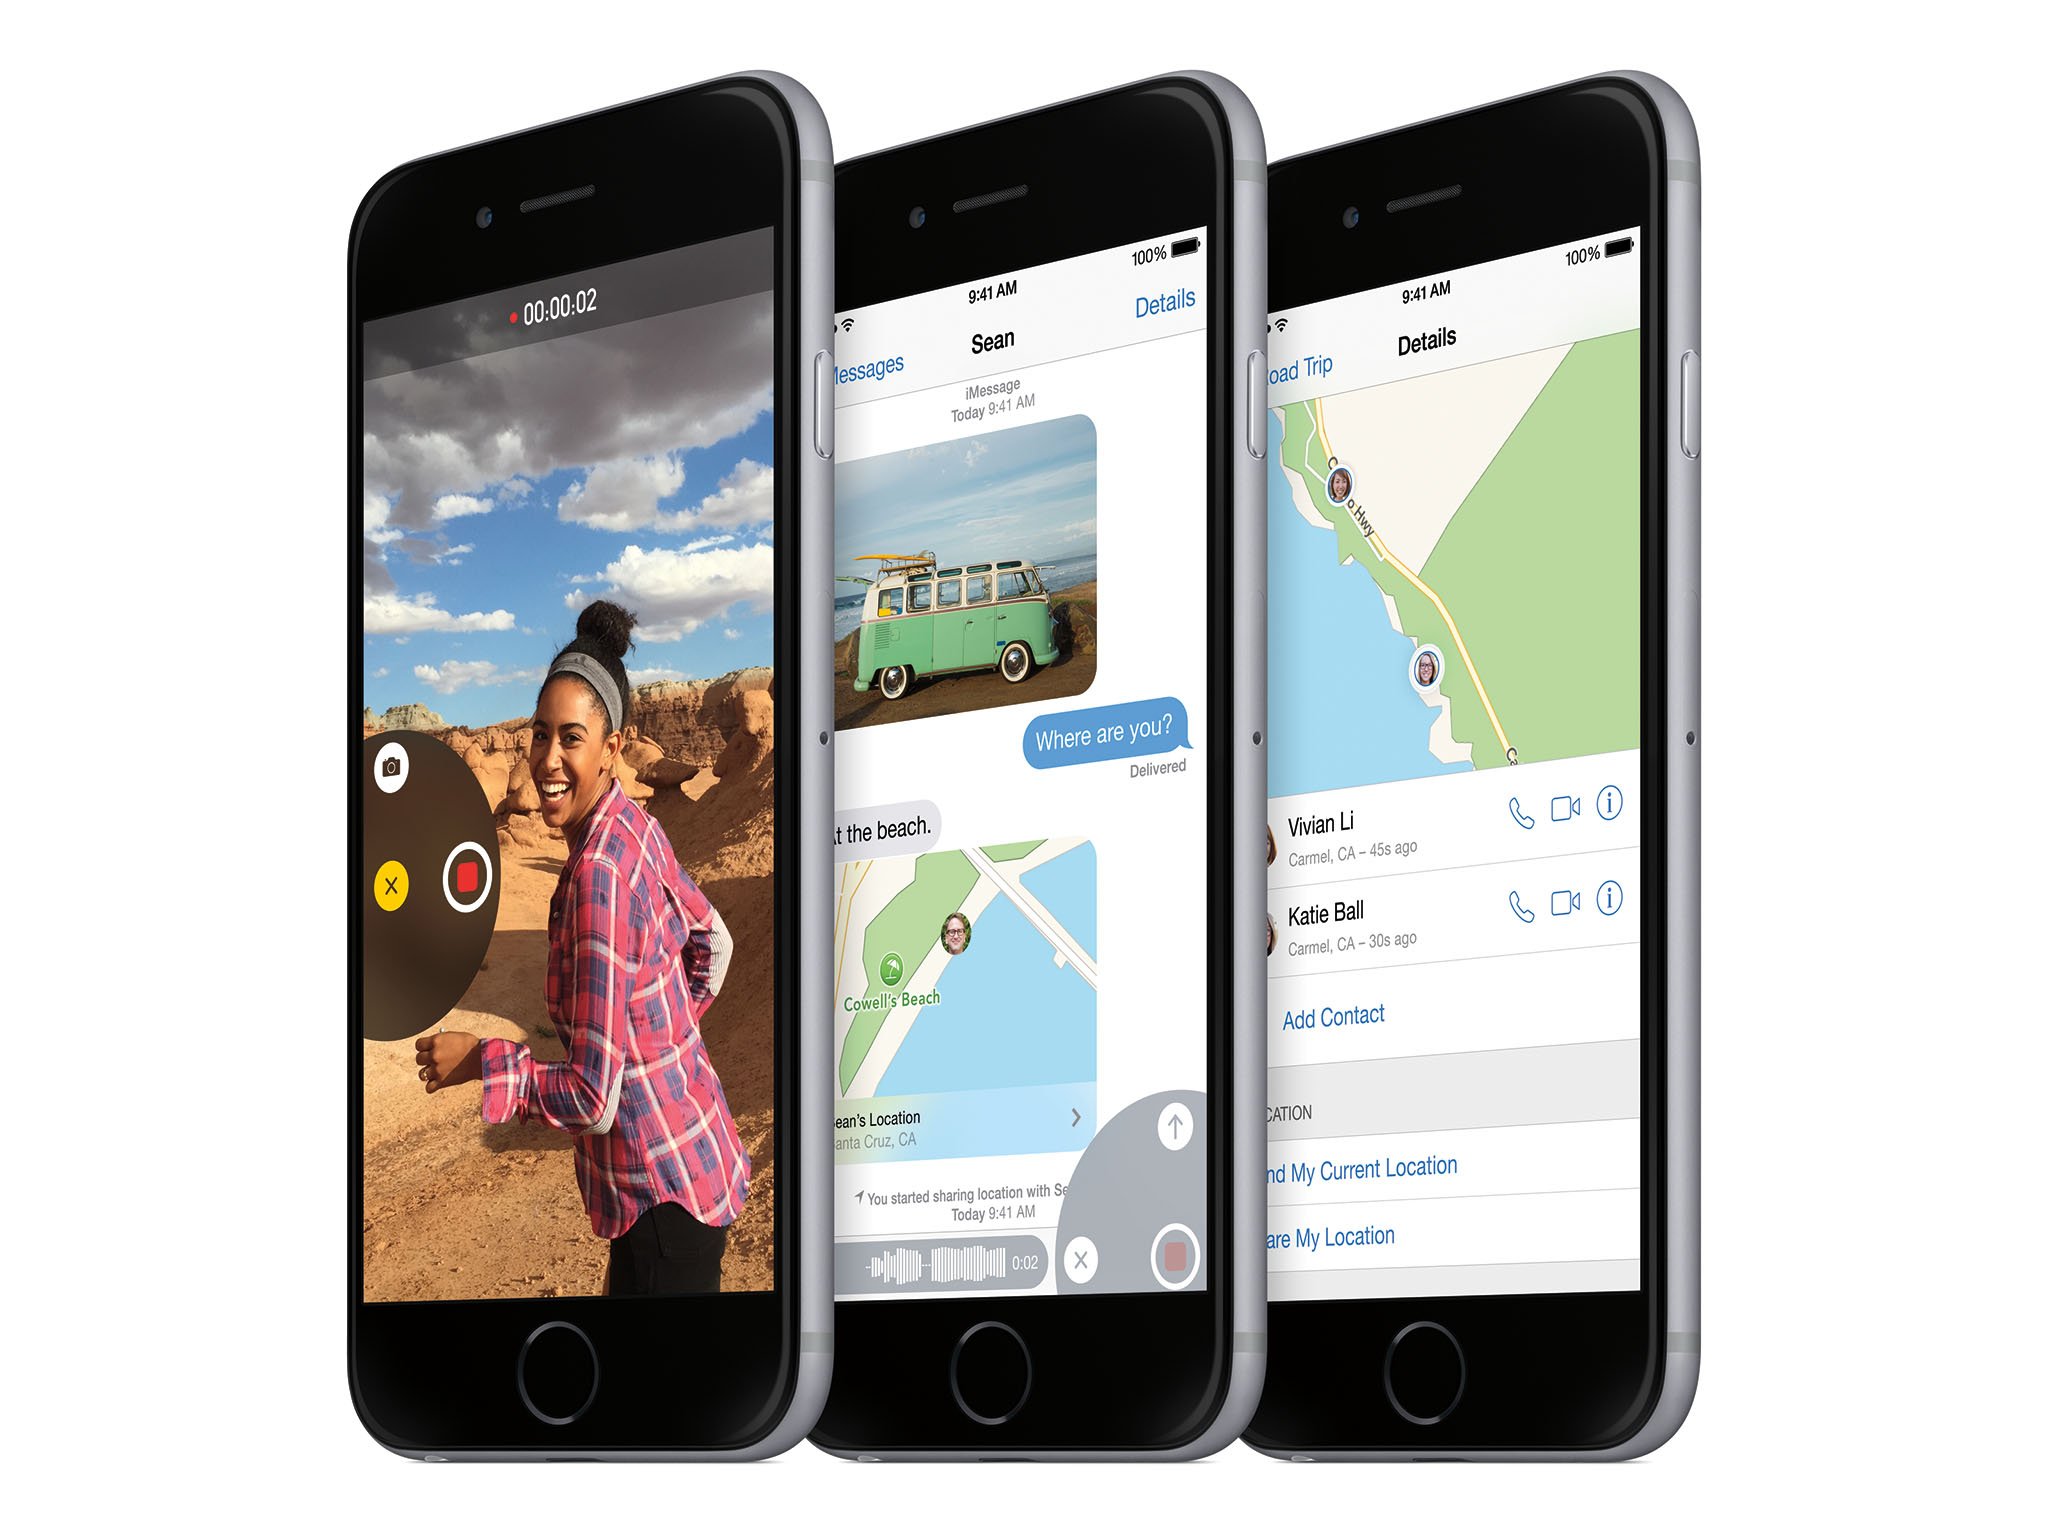 Upgrading to iOS 8? Here's why you shouldn't...yet